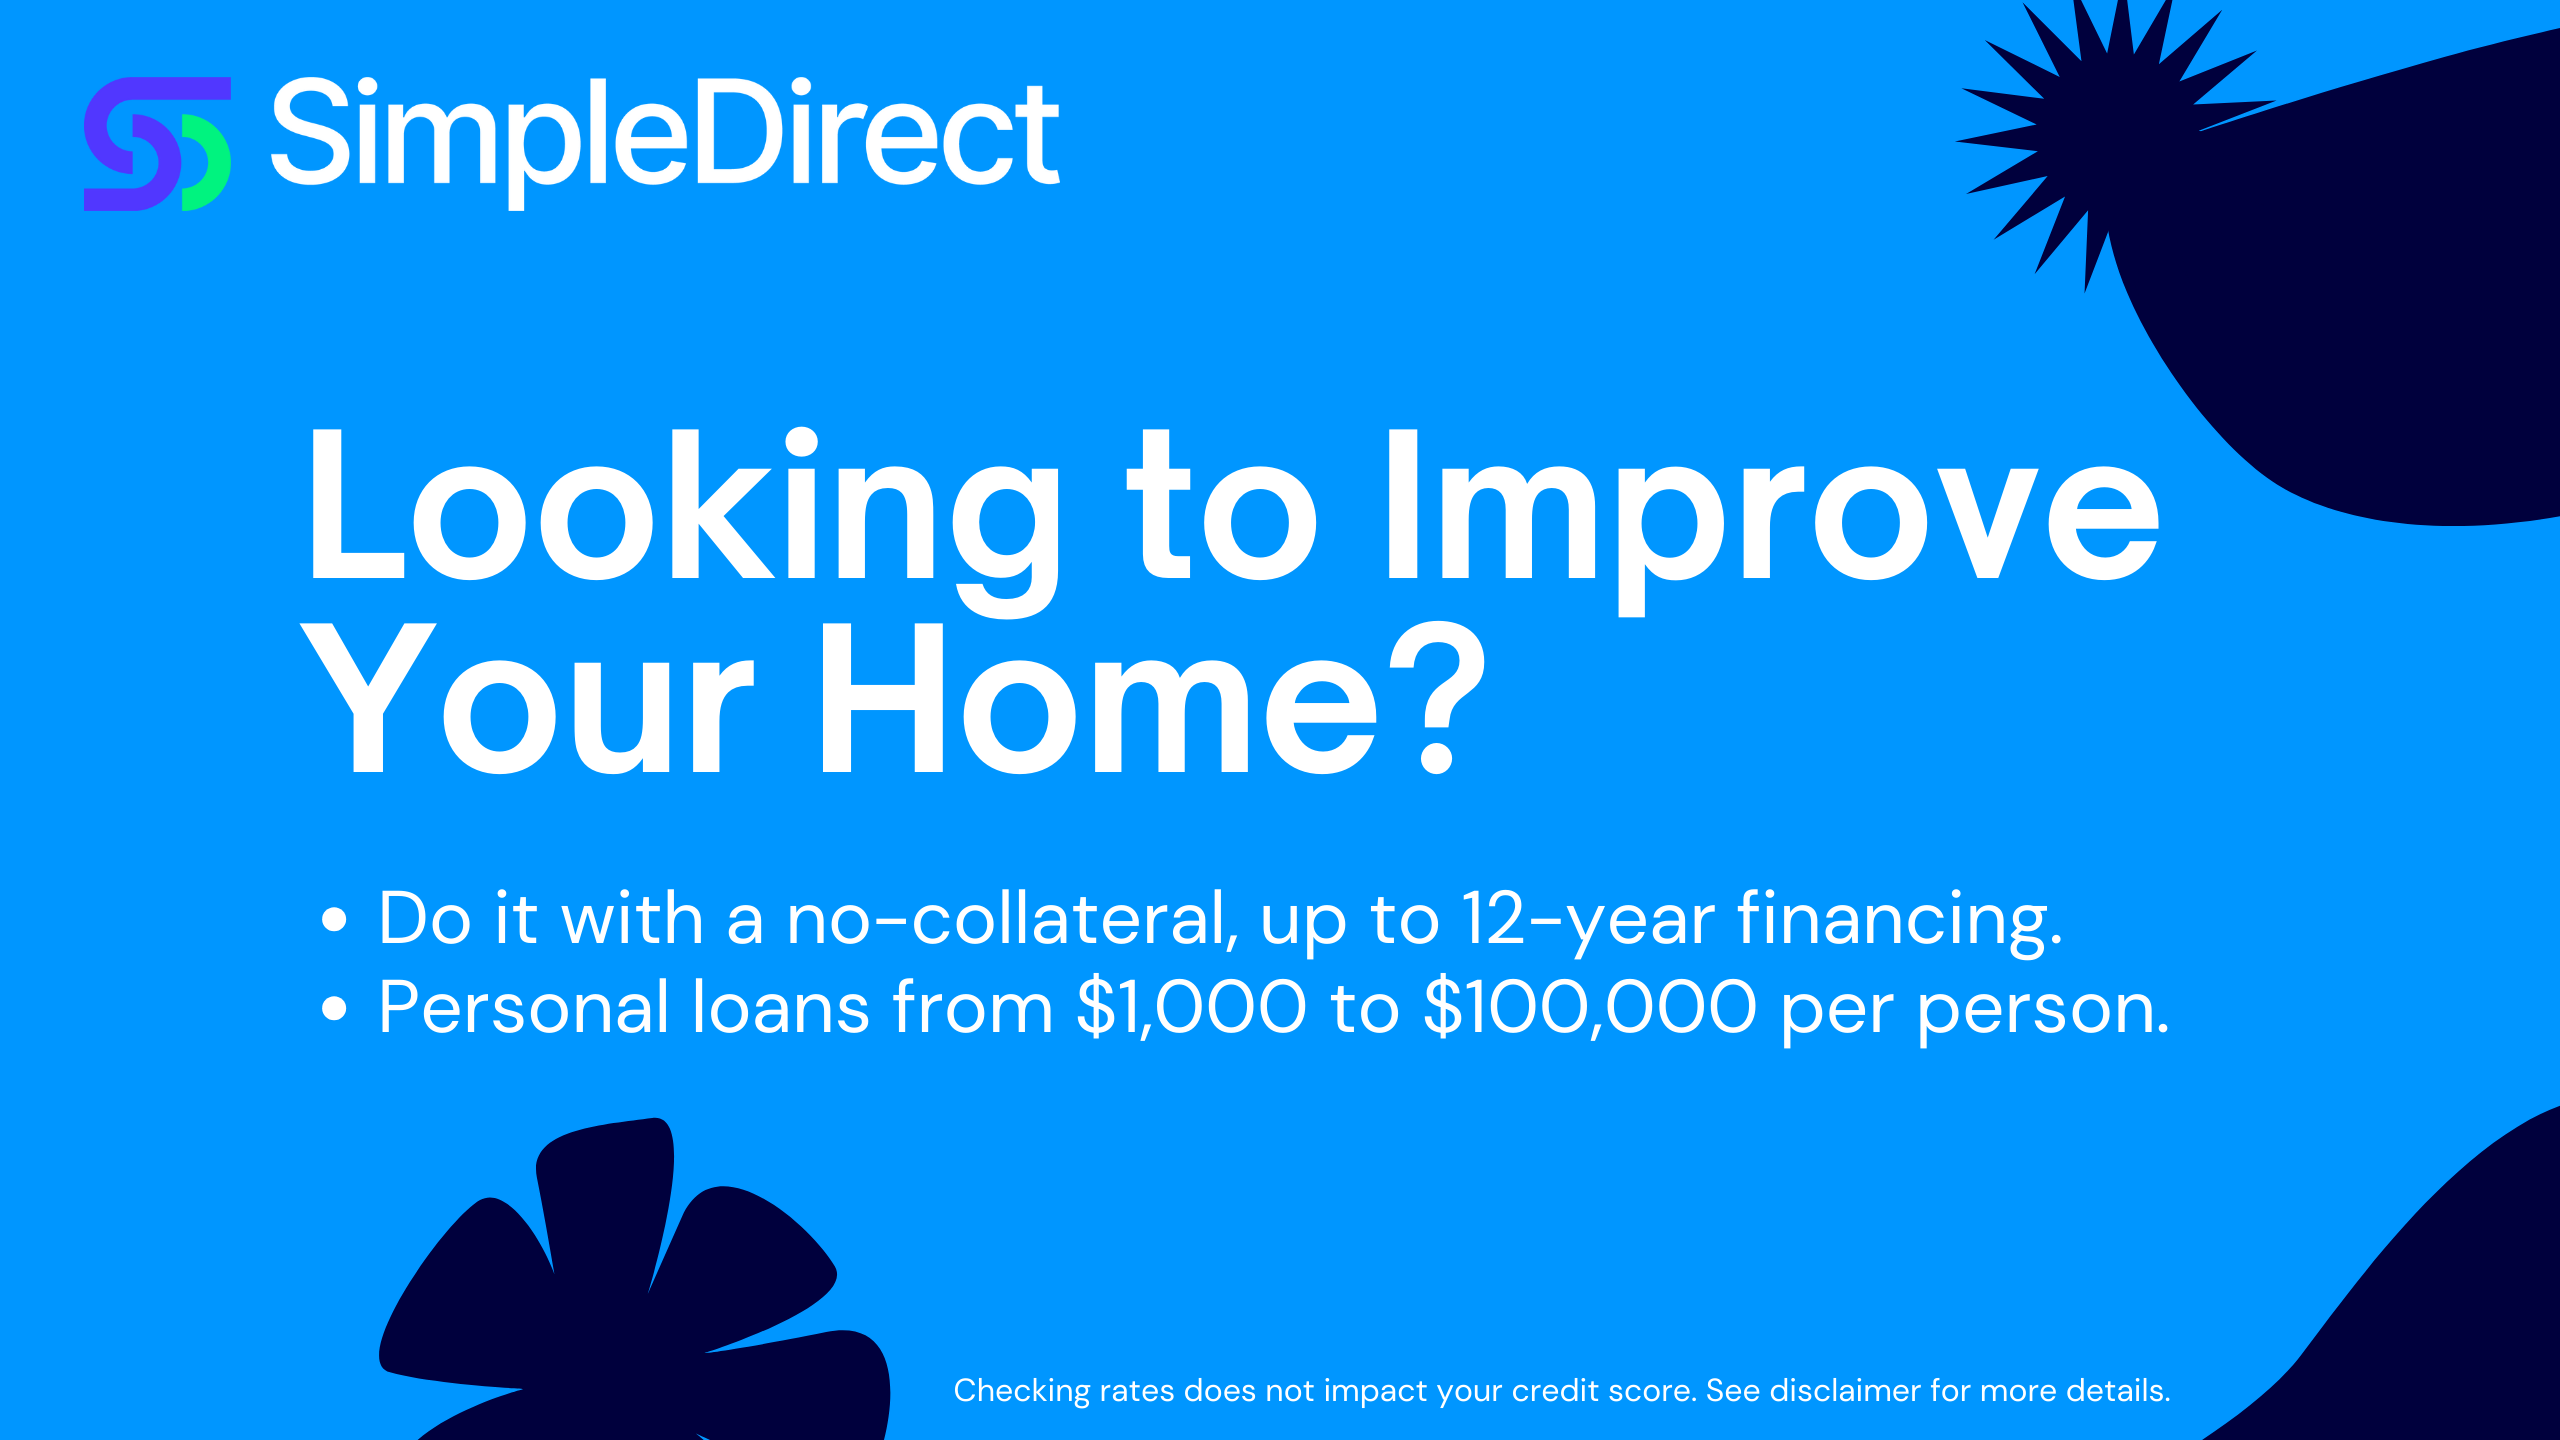 SimpleDirect can also provide options for homeowners to receive no-obligation options for their home renovations.